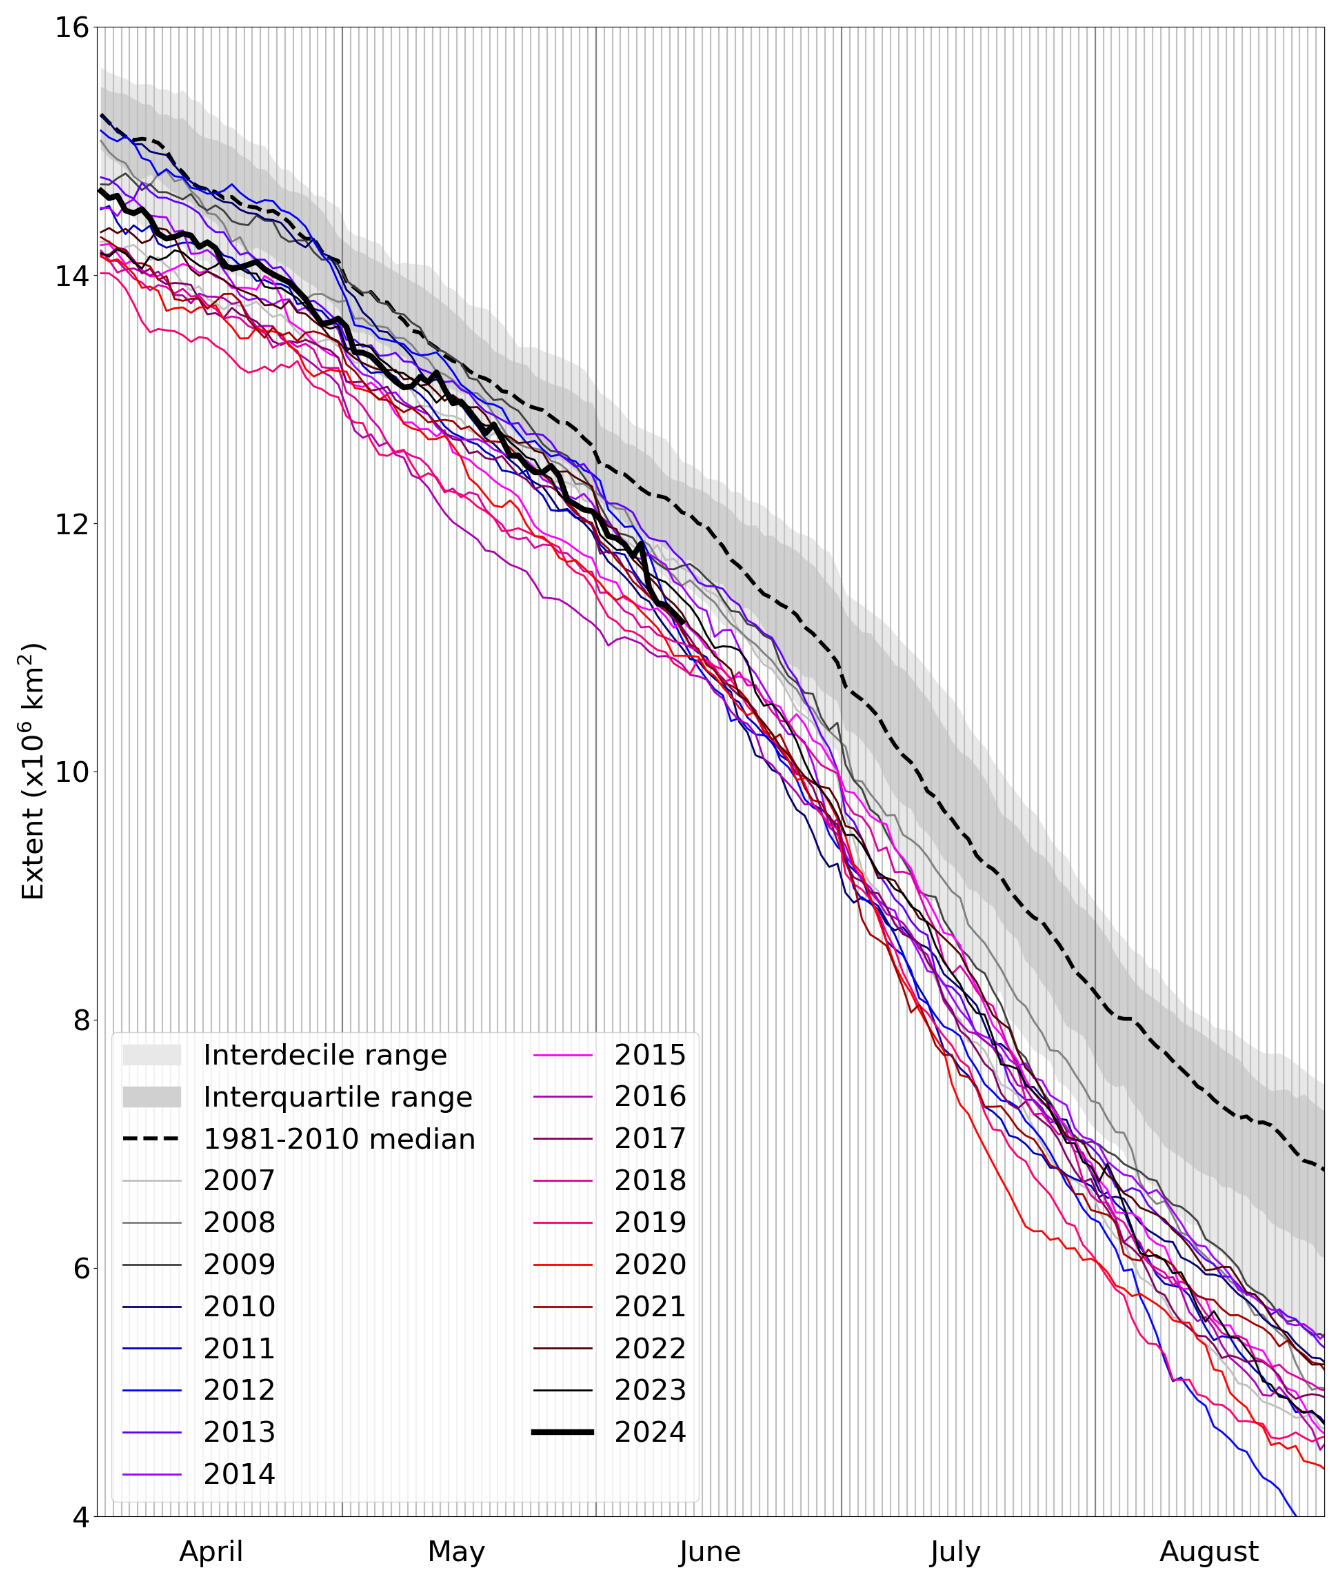 Daily Arctic sea ice extent for 2024, compared with recent years and the 1981-2010 average with interquartile and interdecile ranges shown by the shaded areas. Data are from the National Snow and Ice Data Center (NSIDC).